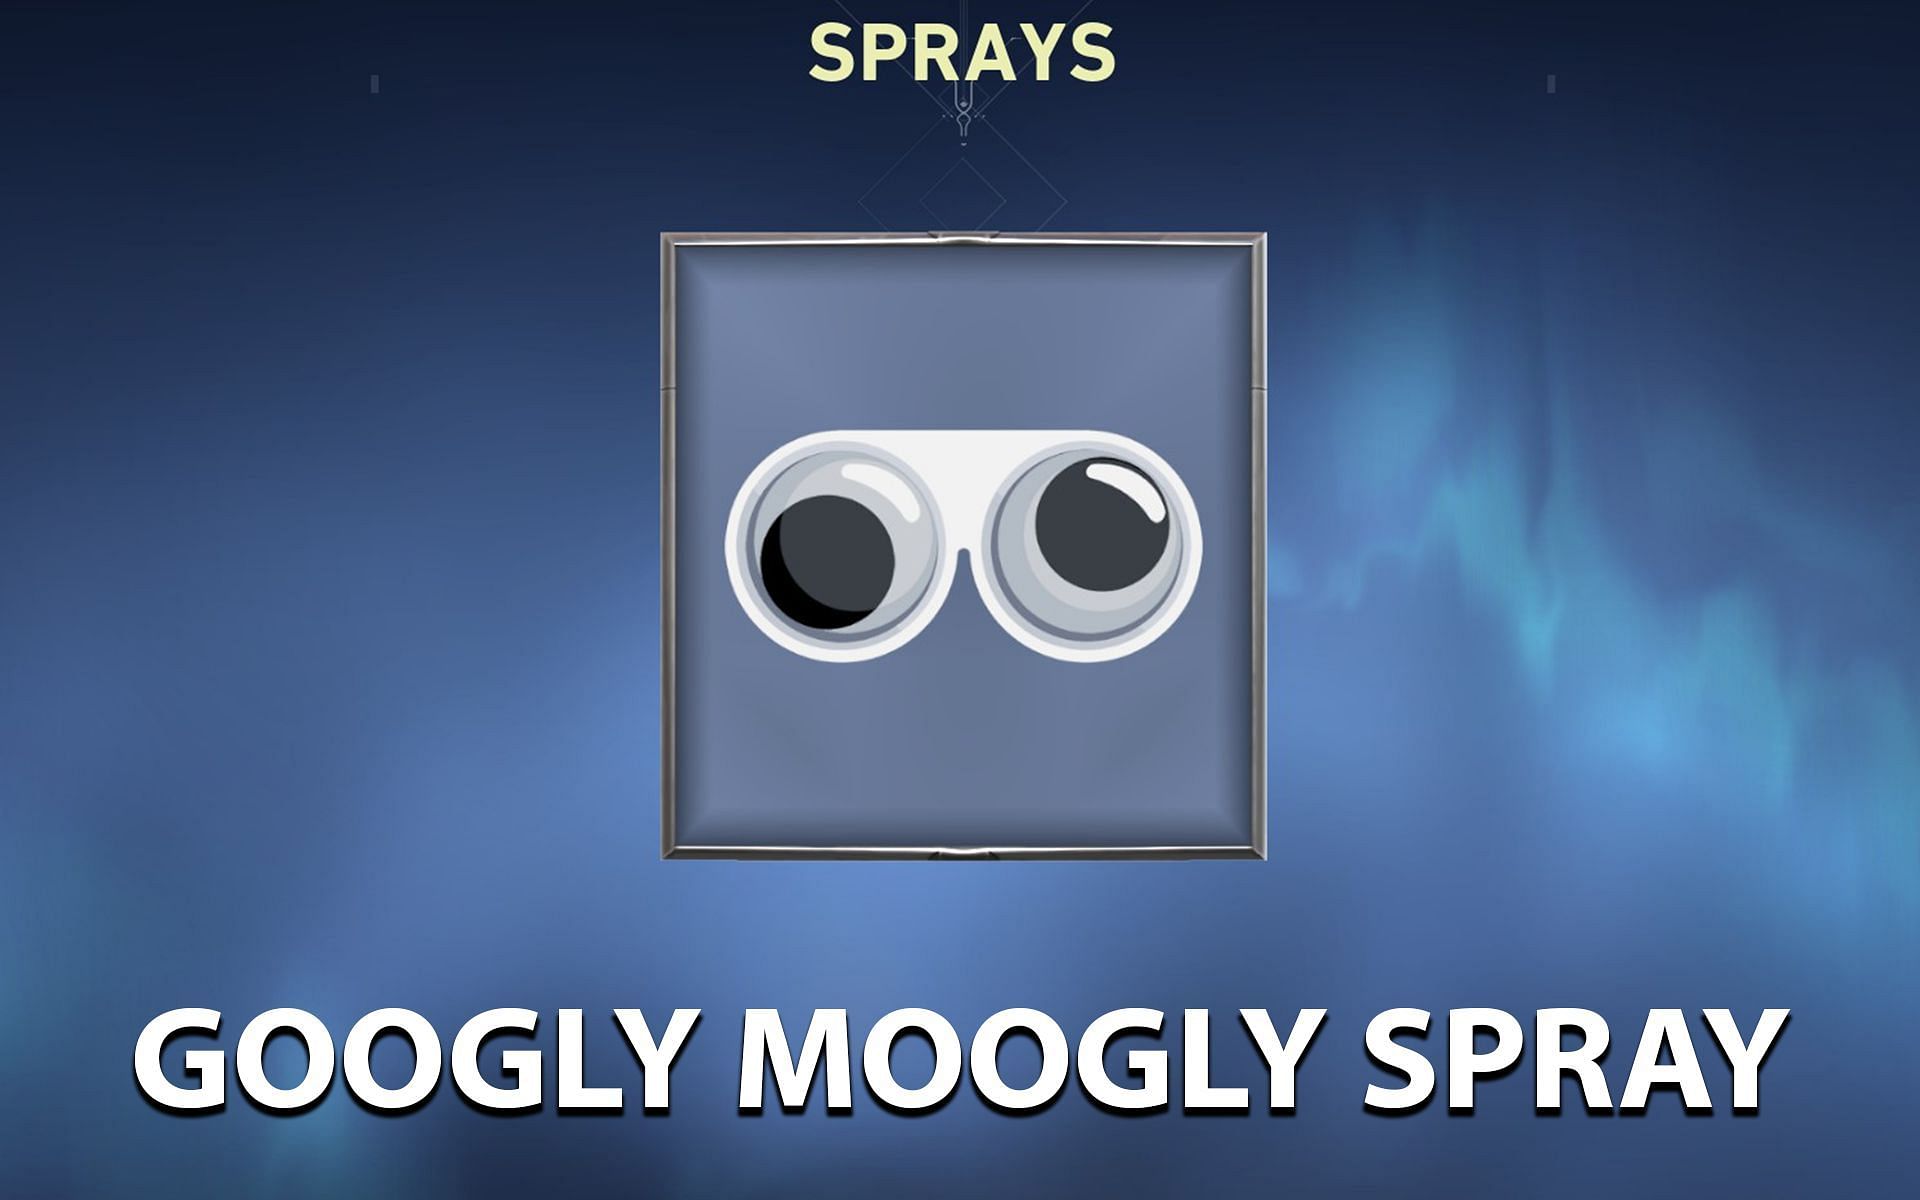 New Googly Moogly spray in Valorant is now available via Amazon Prime Gaming (Image via Riot Games)